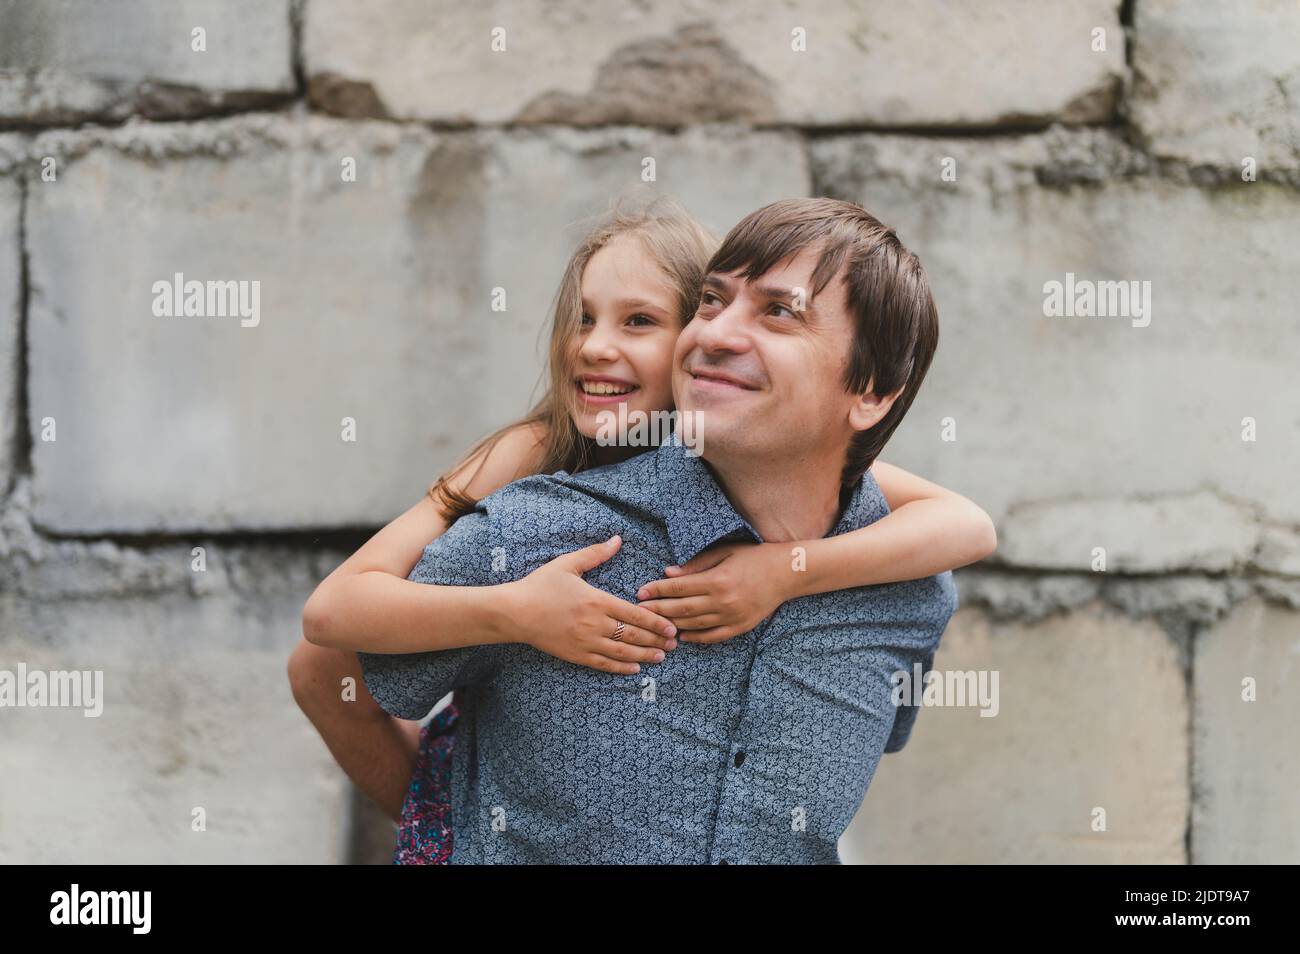 man dad having quality time with their kid daughter girl nine year old on his back. happy father playing with child. real life authentic day-to-day fa Stock Photo